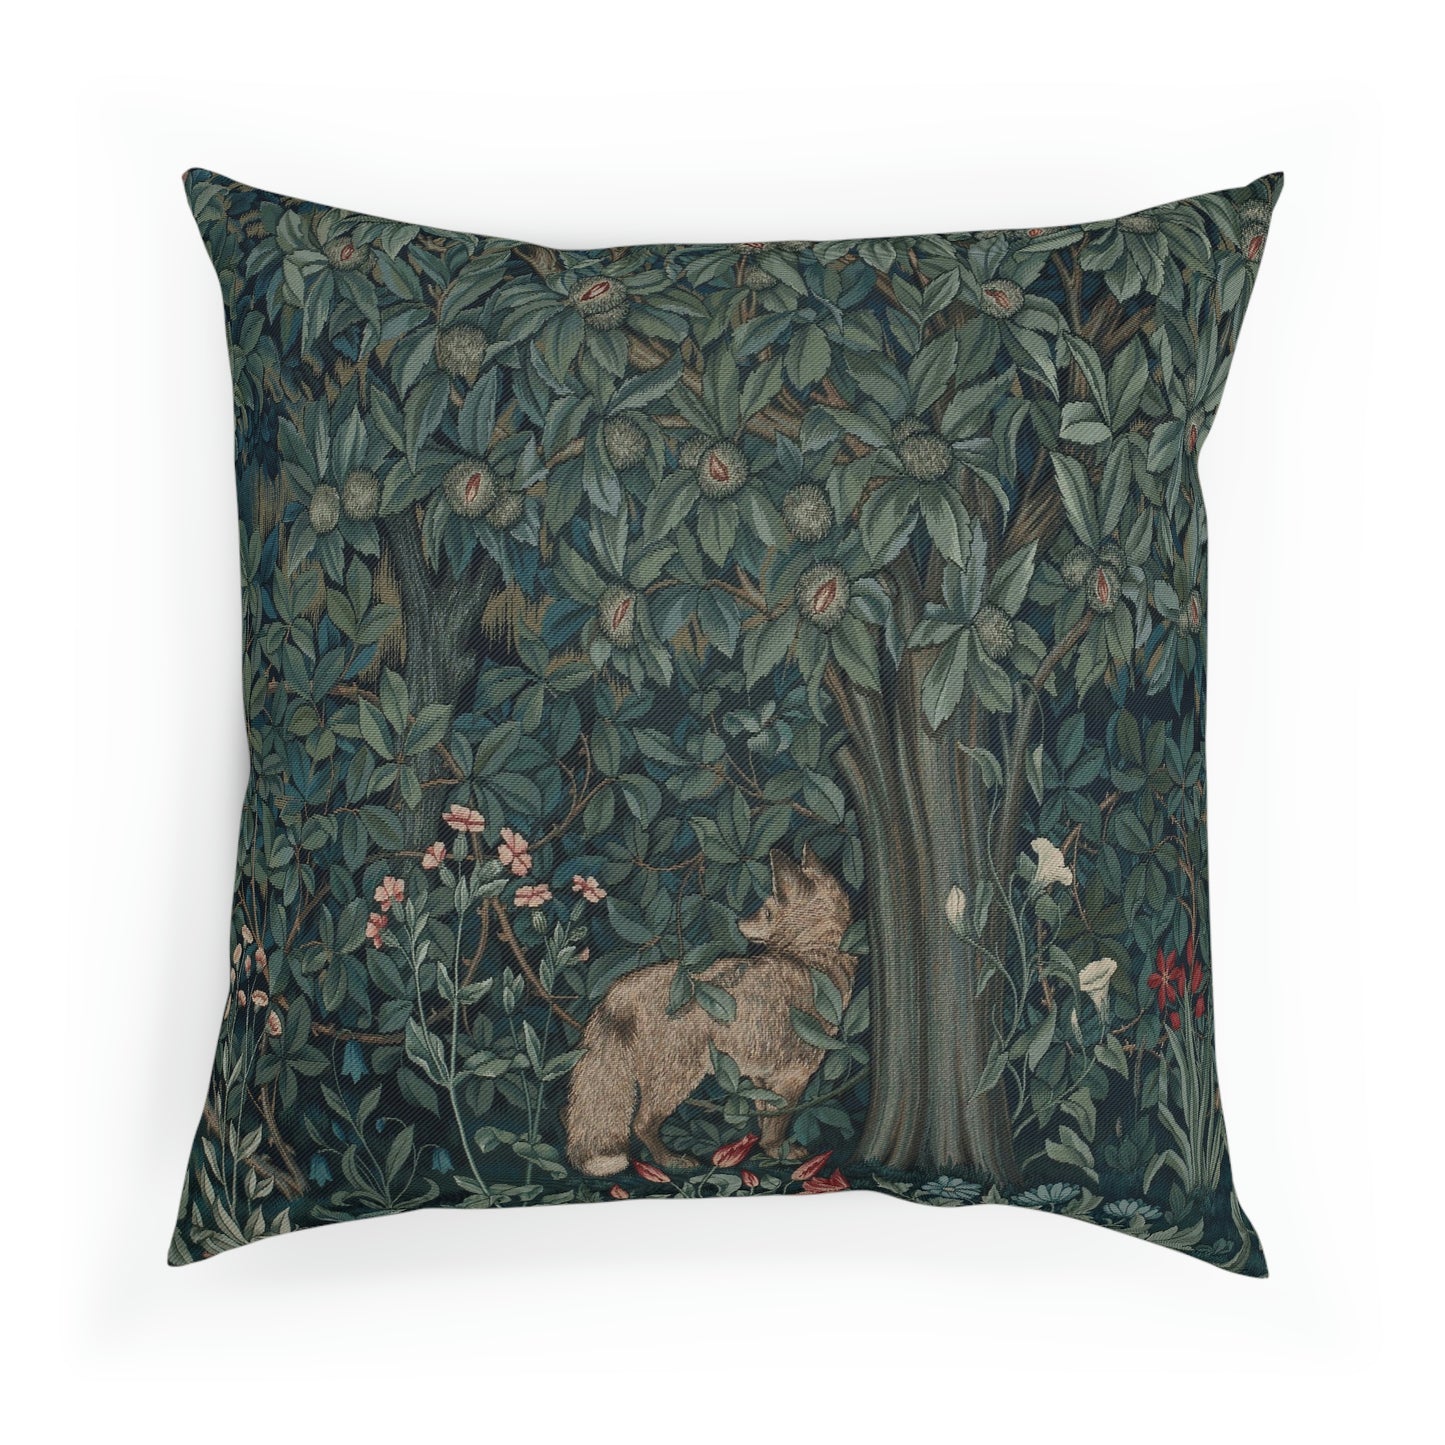 William-Morris-and-Co-Cushion-and-Cushion-Cover-Fox-by-John-Henry-Dearle-Green-Forest-Collection-2